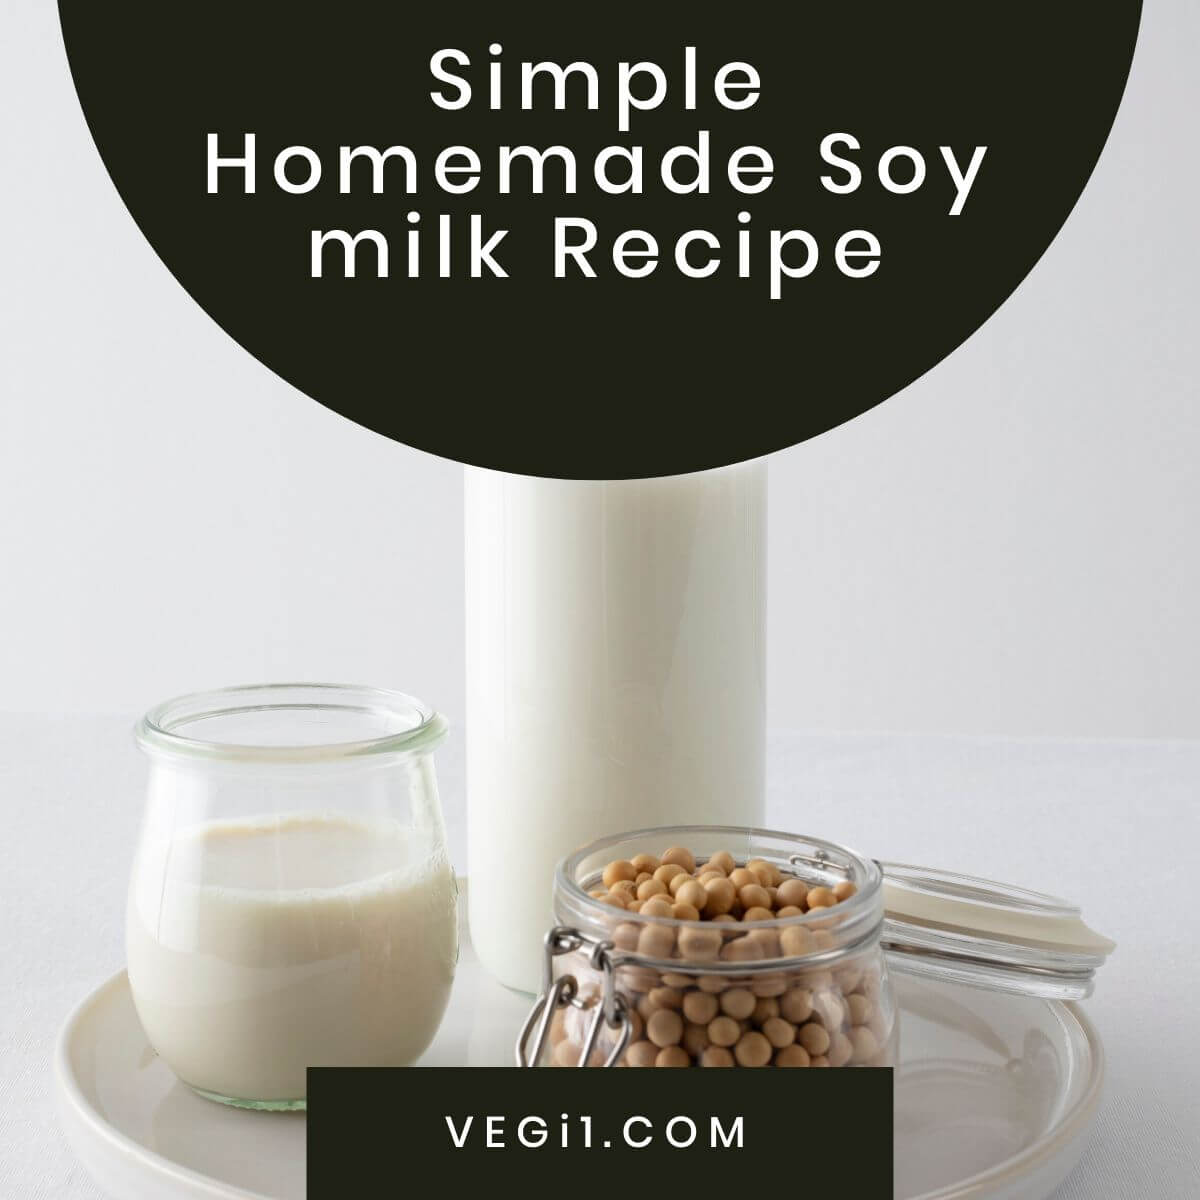 Learn how to make delicious and nutritious soy milk at home with this easy vegan recipe.